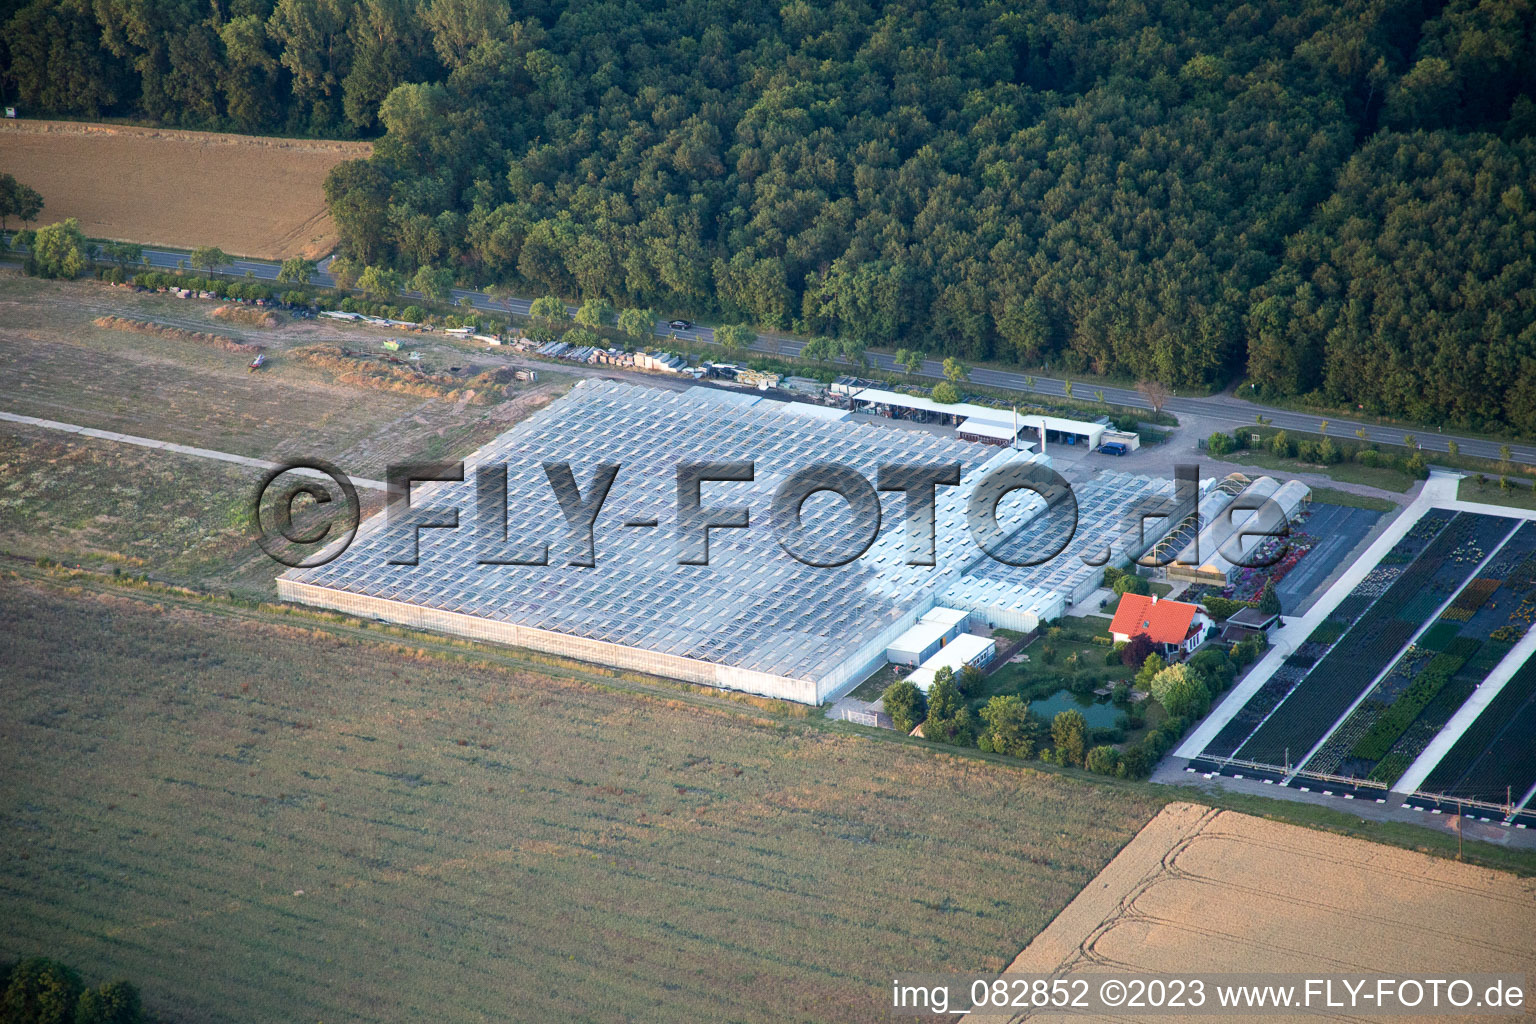 Greenhouses of geraniums Endisch in Essingen in the state Rhineland-Palatinate, Germany